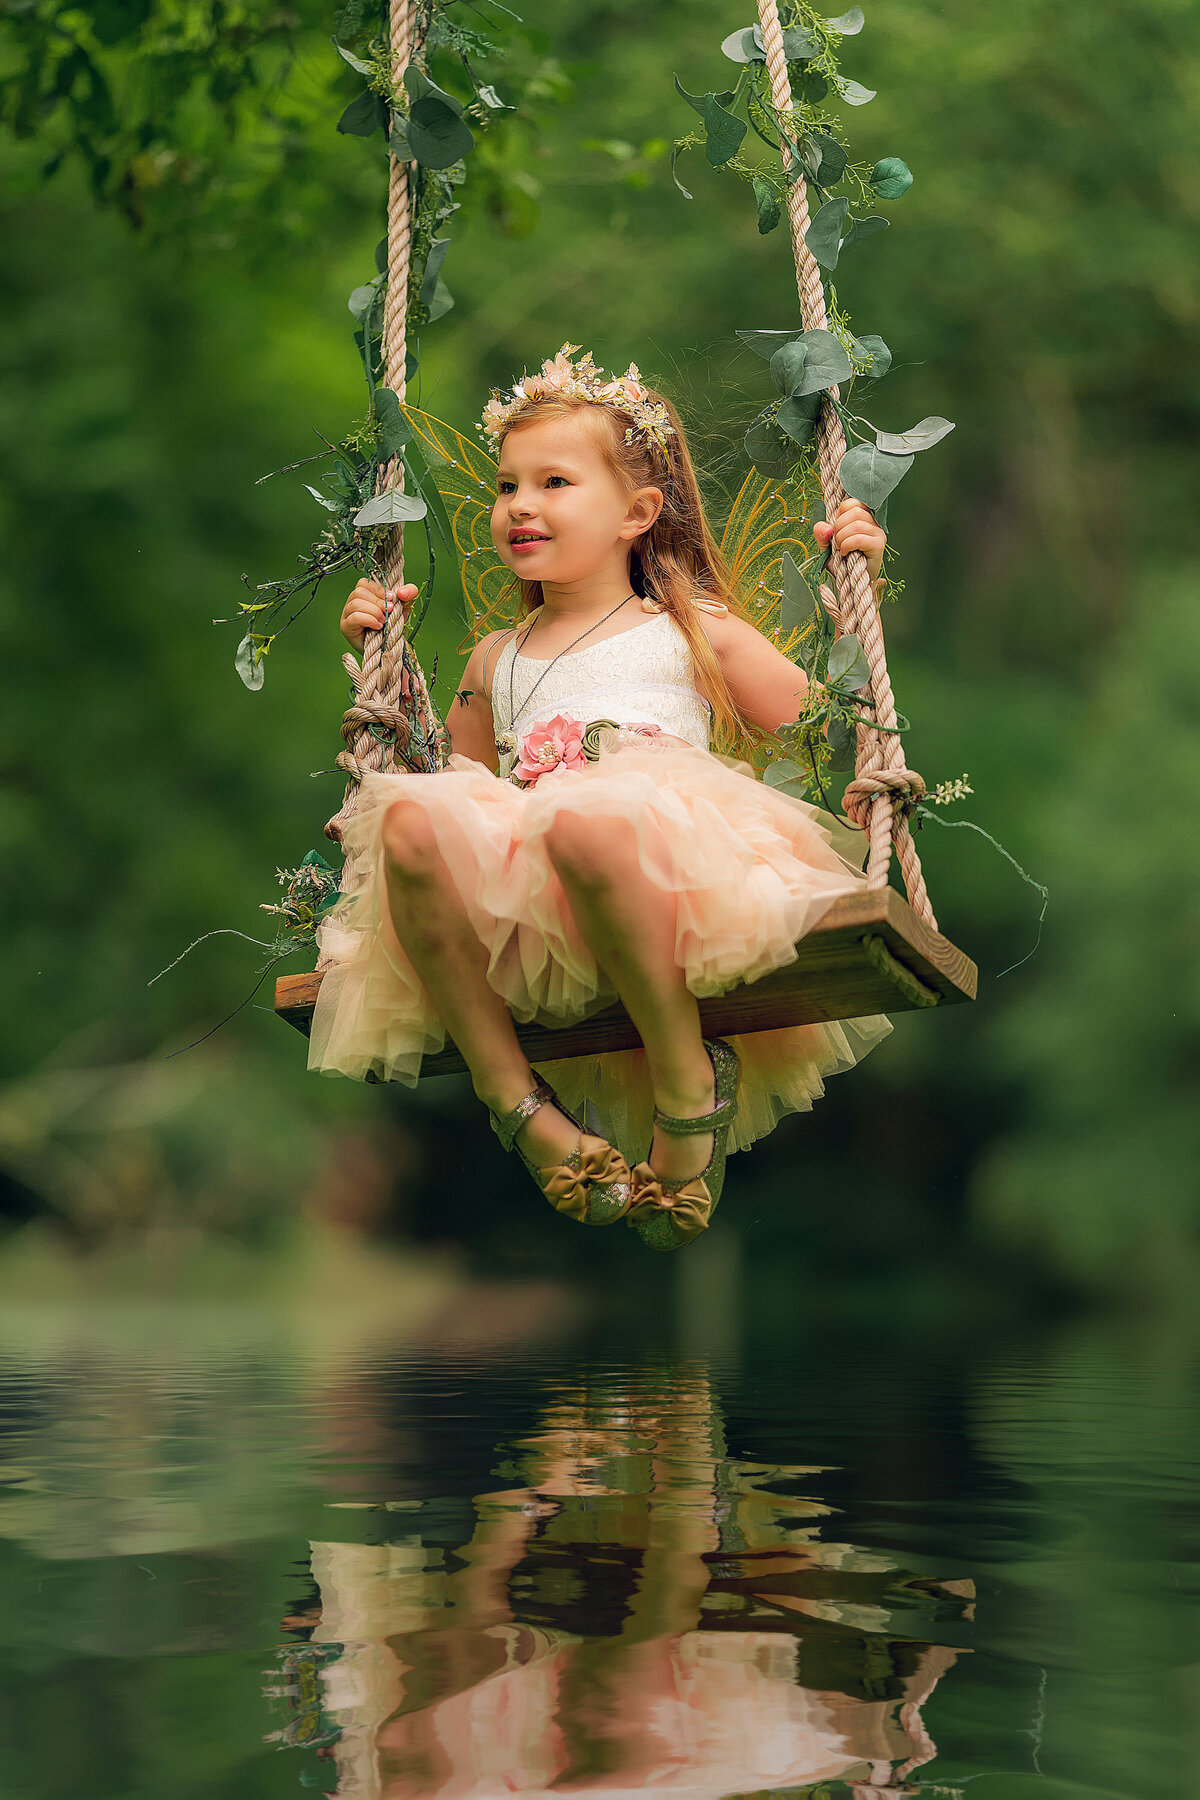 A young girl from Pewaukee, WI sits on a rope swing over a river dressed as a fairy in a tutu.